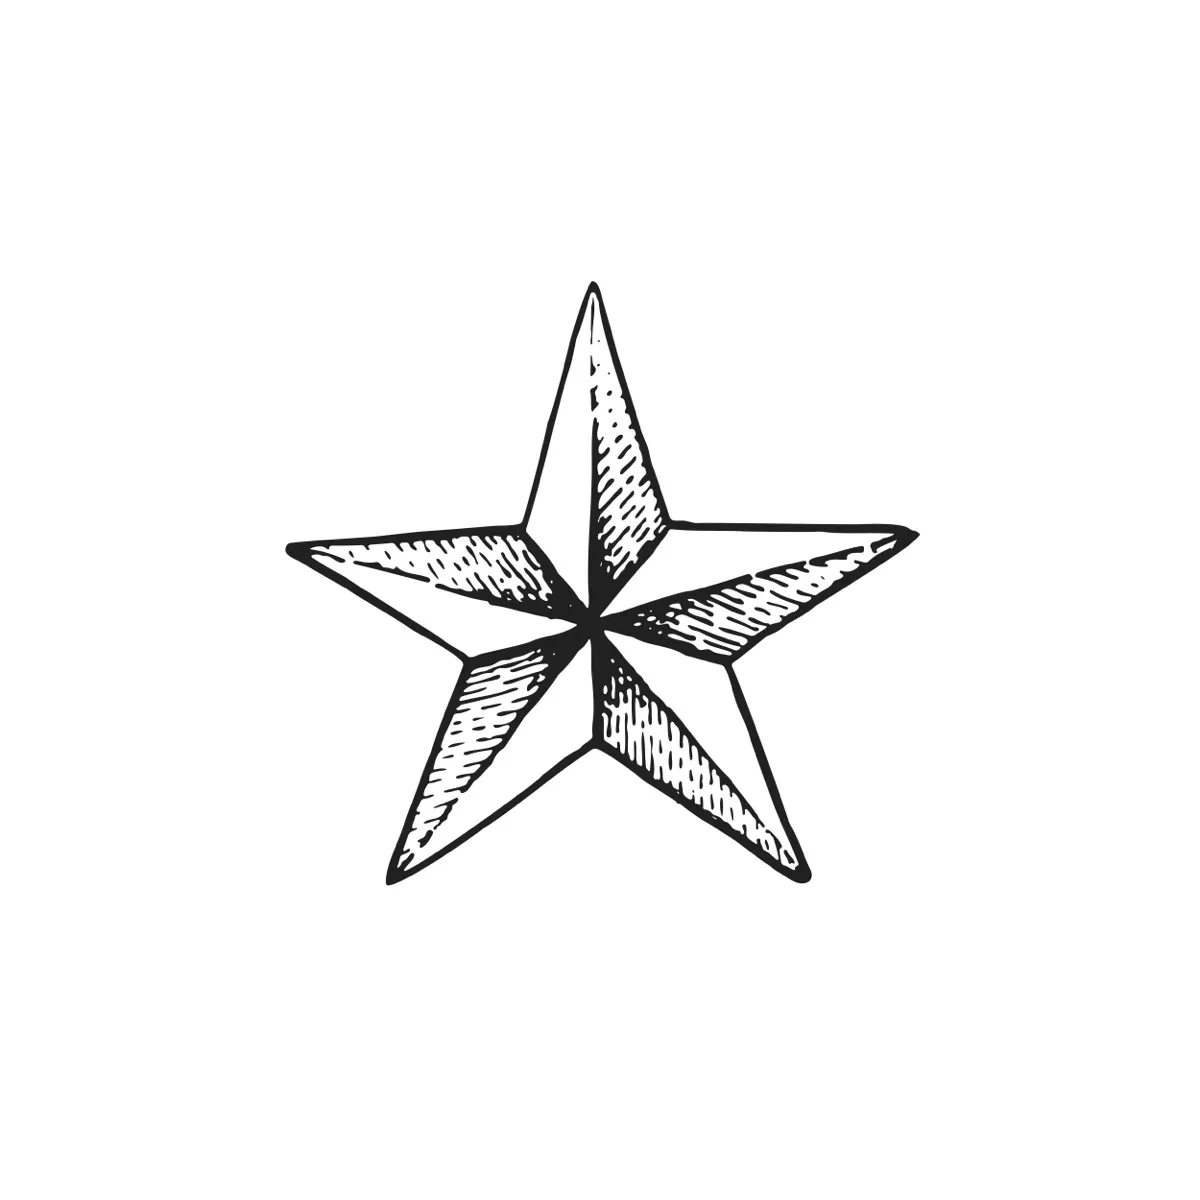 A line drawing of a nautical star tattoo